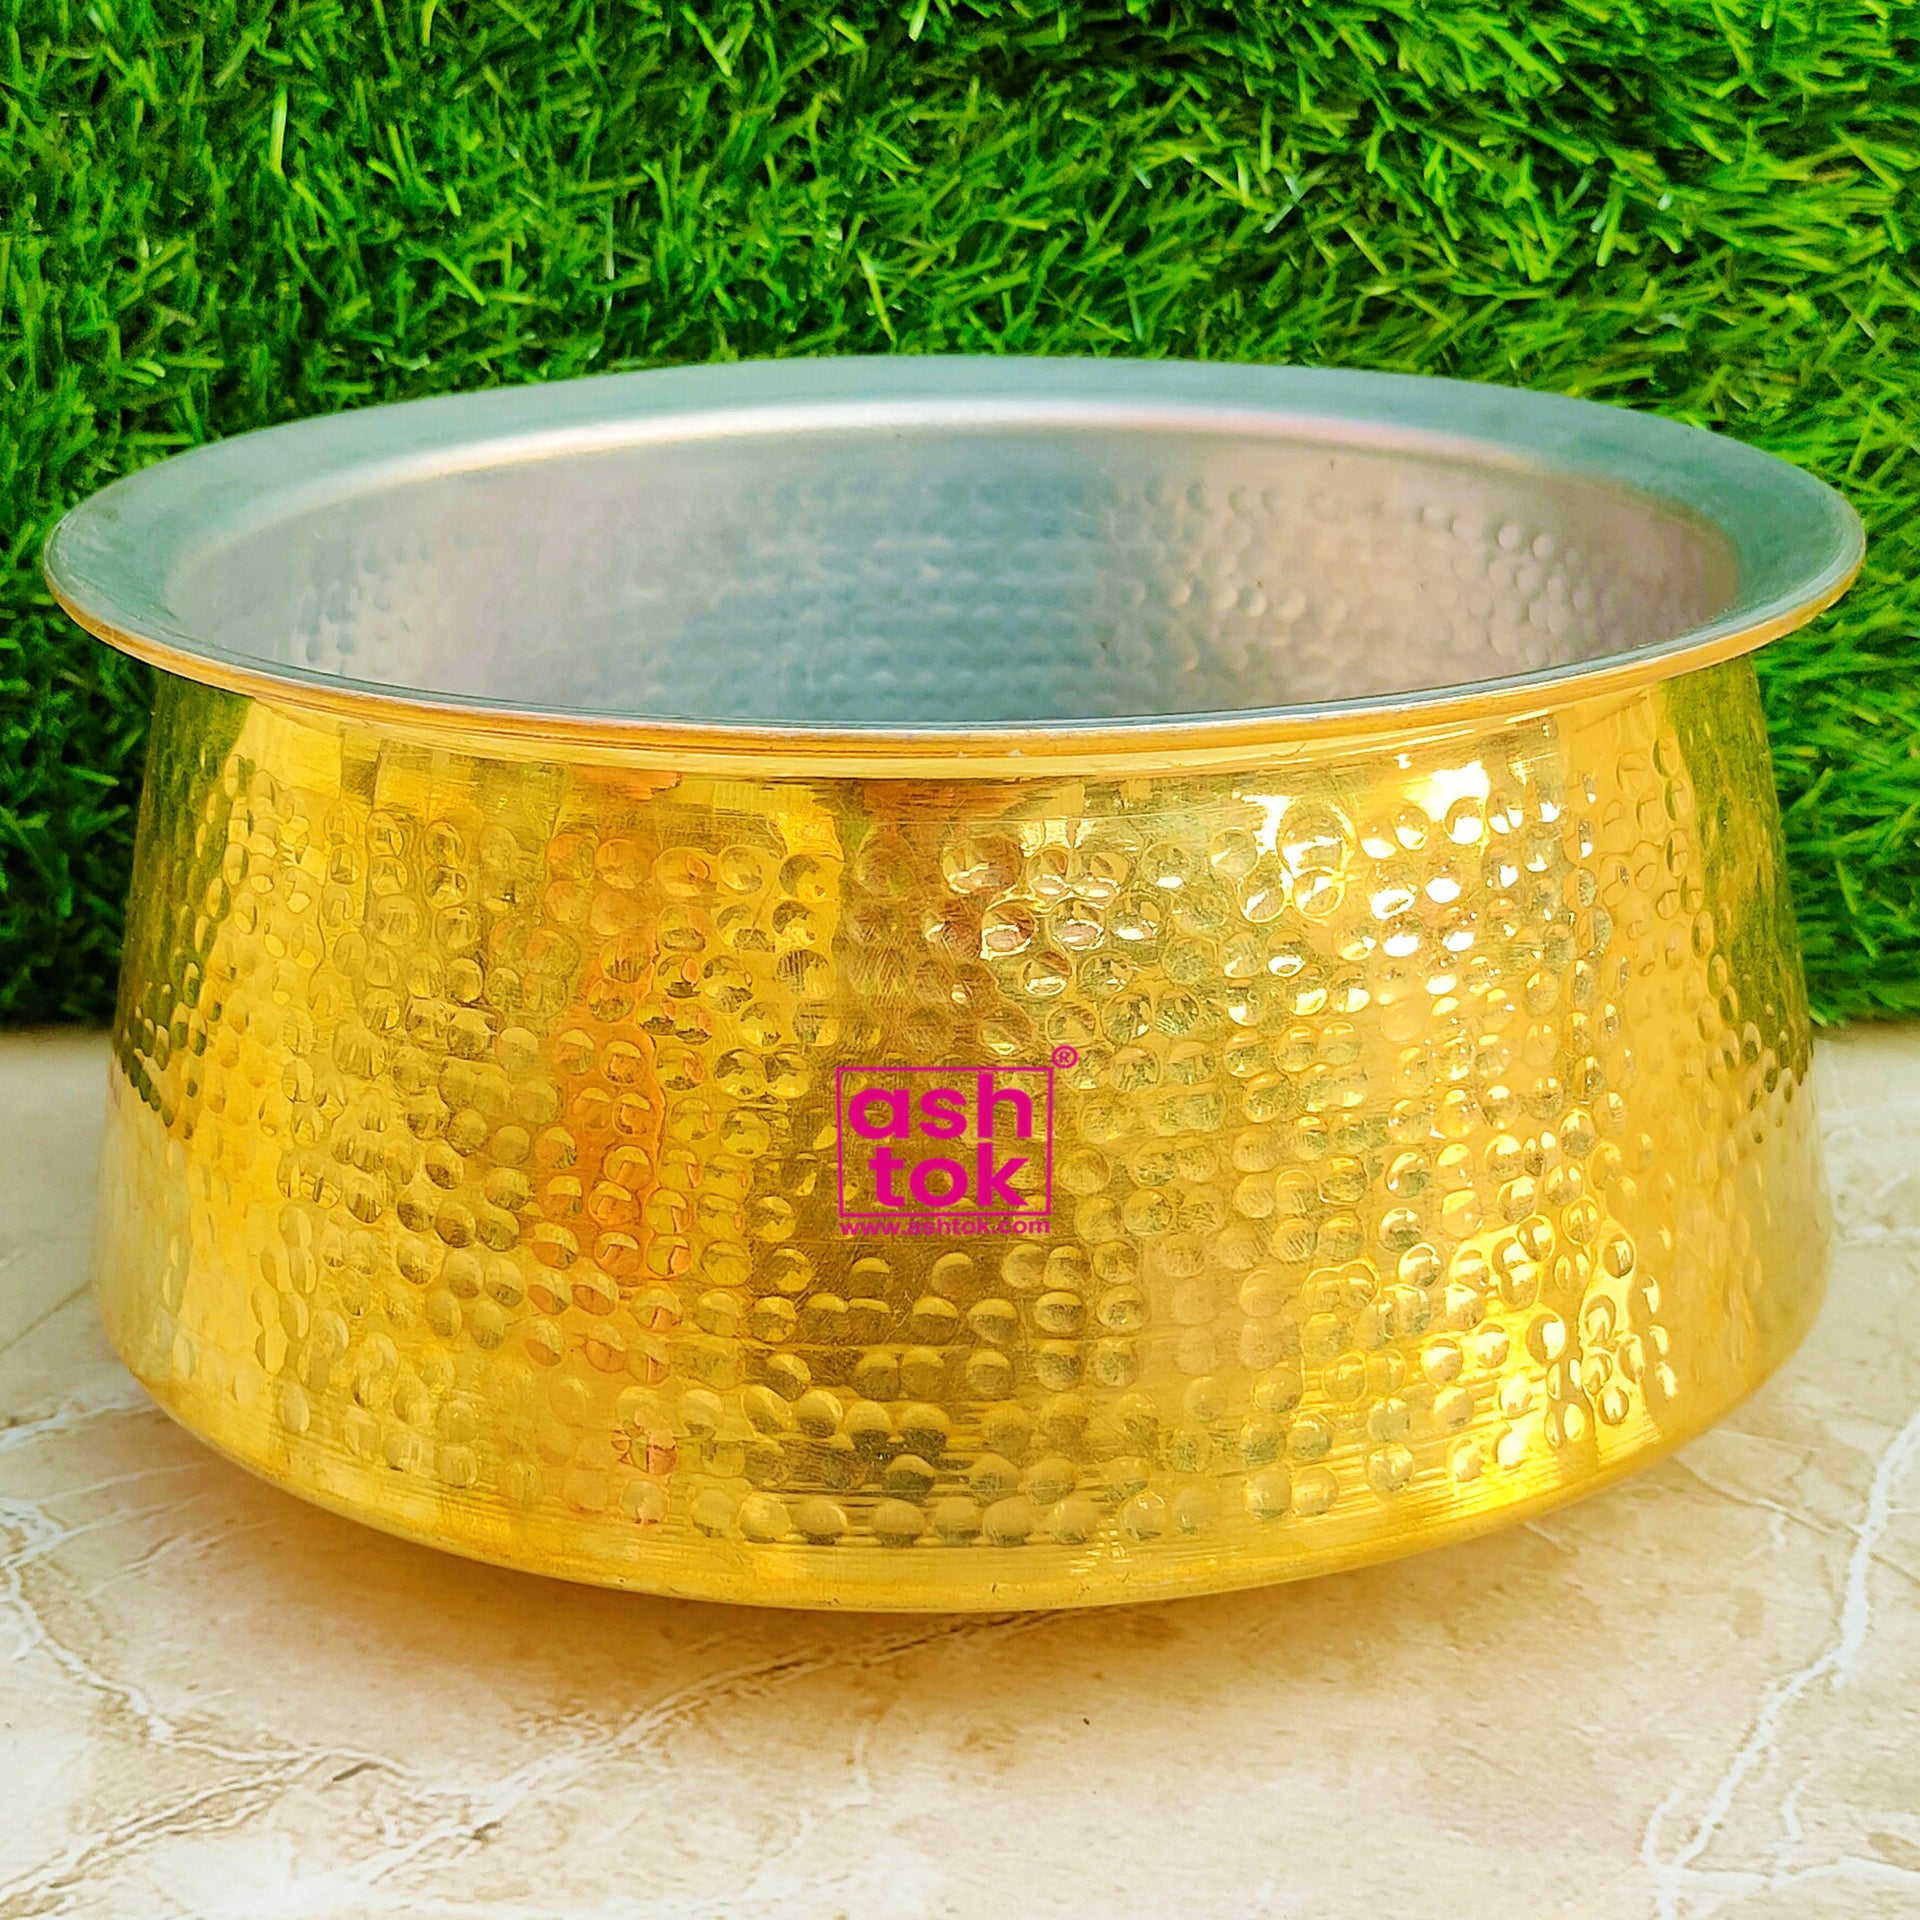 Introducing Brass Kadai with - Essential Traditions